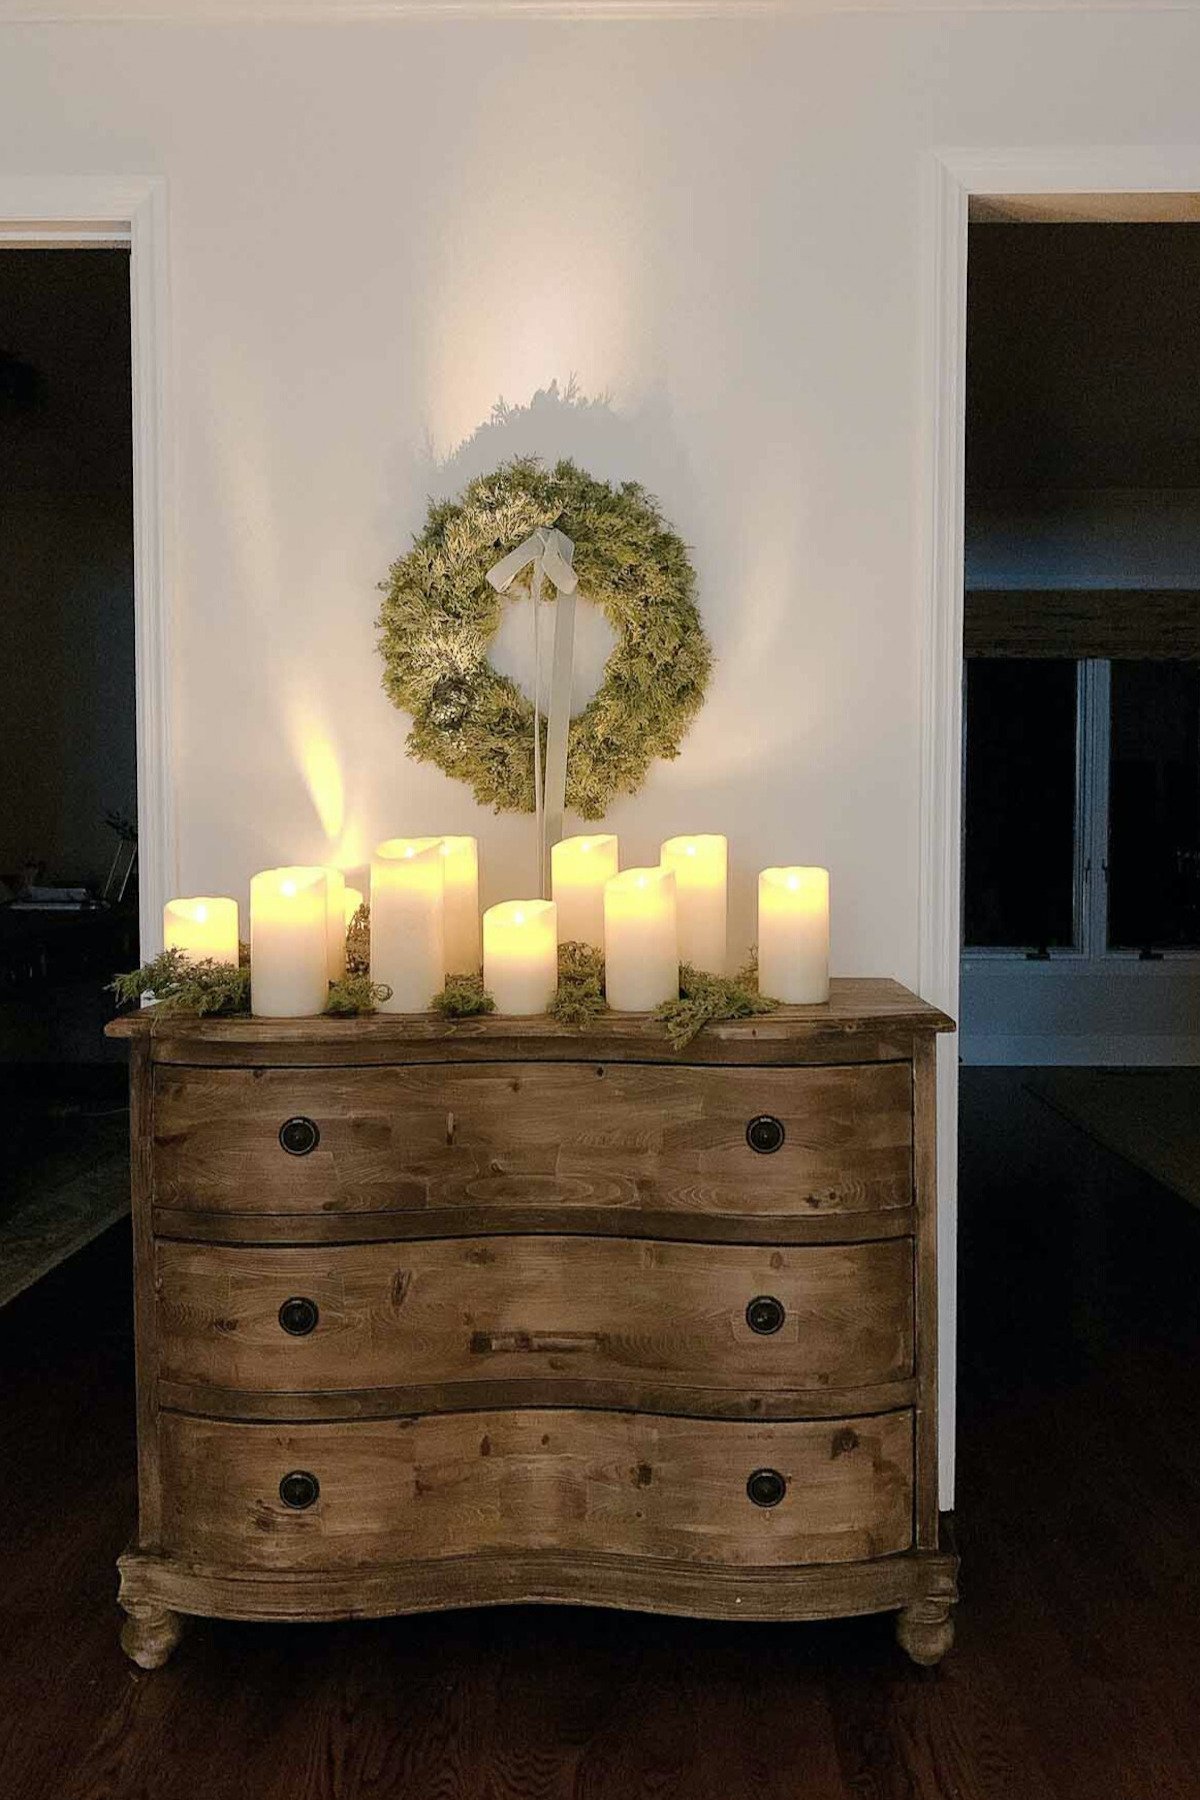 A dresser with LED candles and a wreath on it.